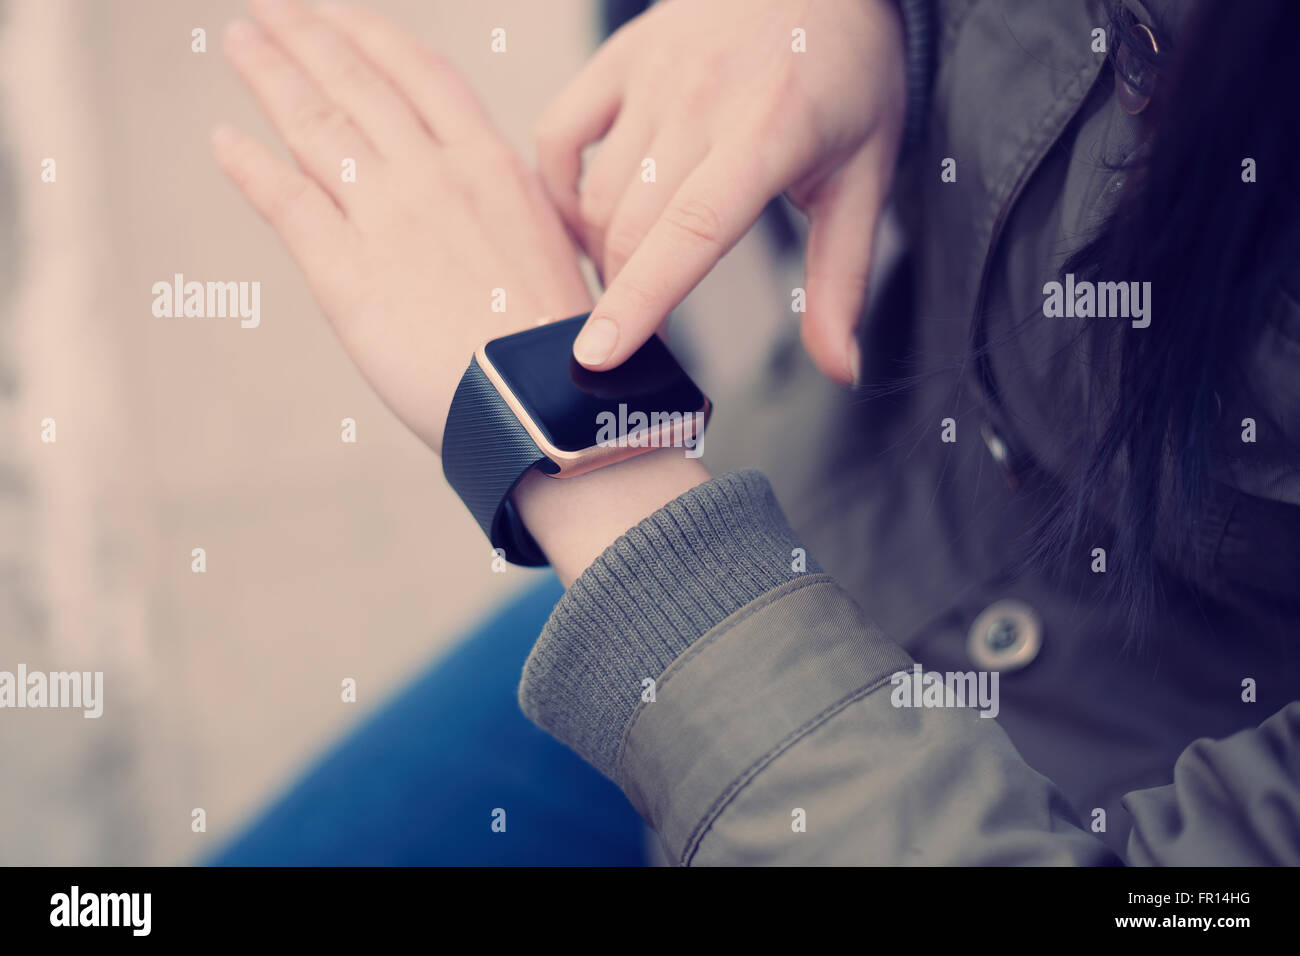 Female using her trendy smart wrist watch. This person is always connected to social media and internet. Modern technology and v Stock Photo